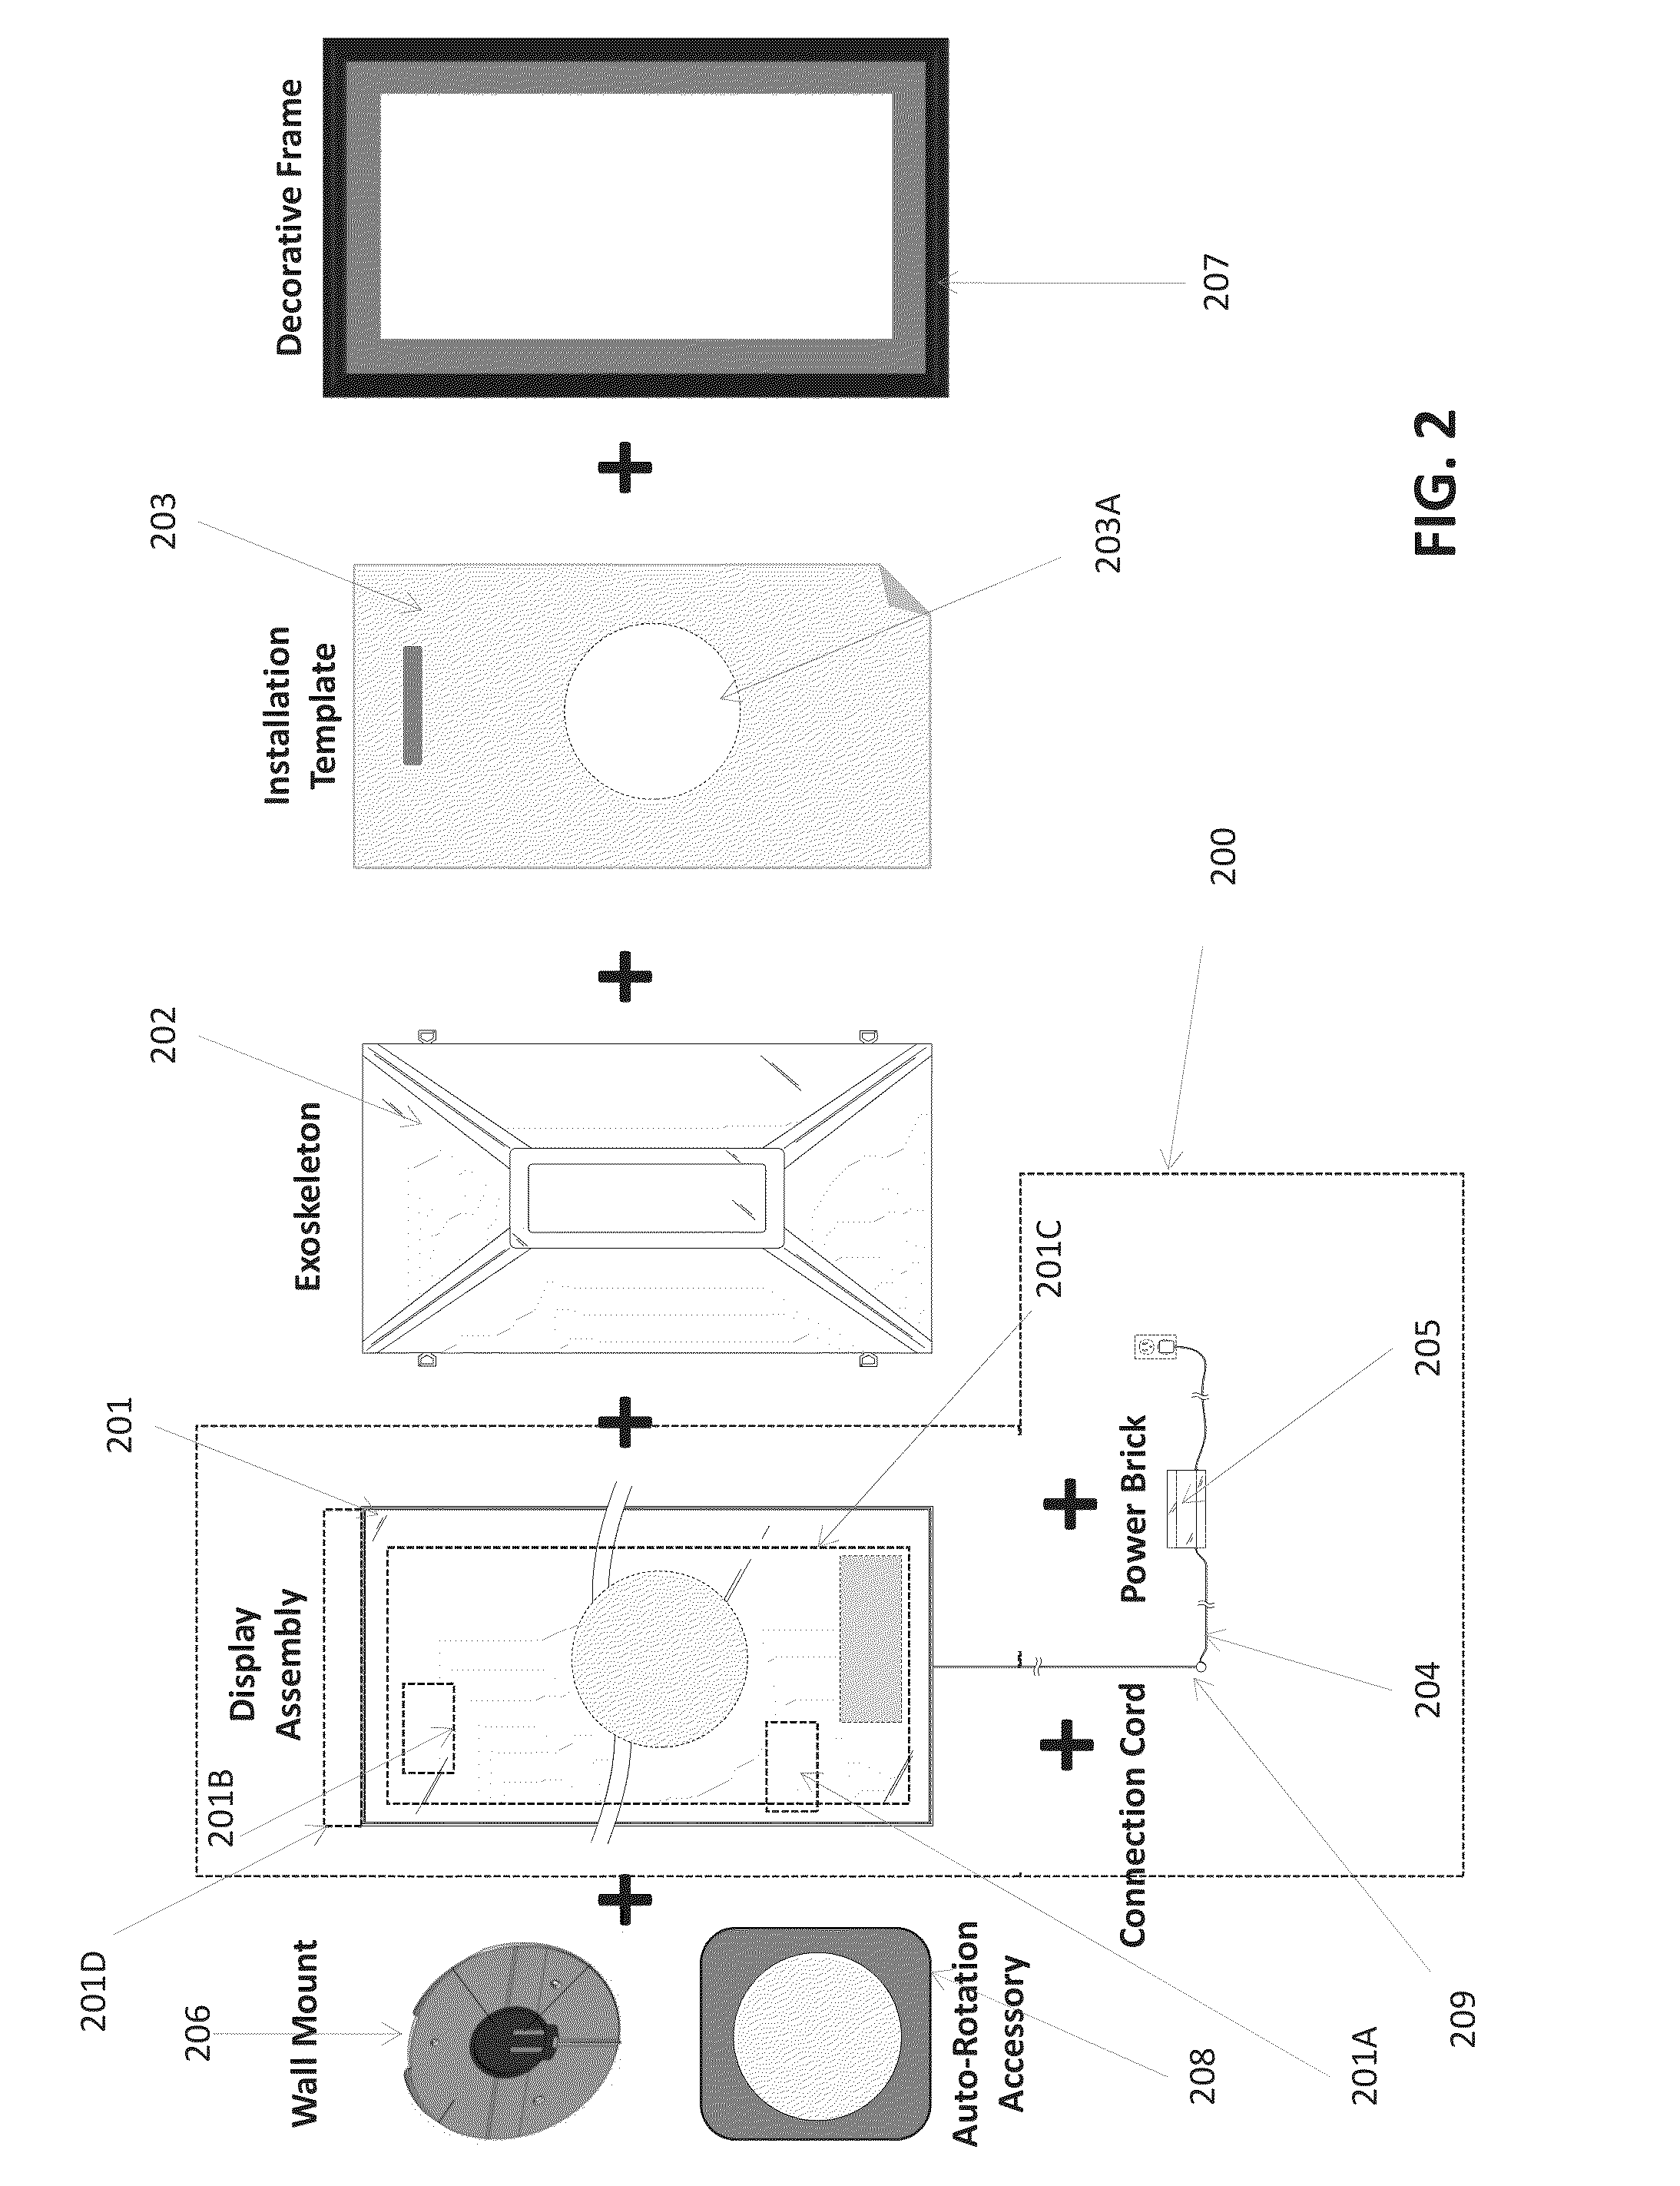 Systems and Methods for Distributing, Displaying, Viewing, and Controlling Digital Art and Imaging